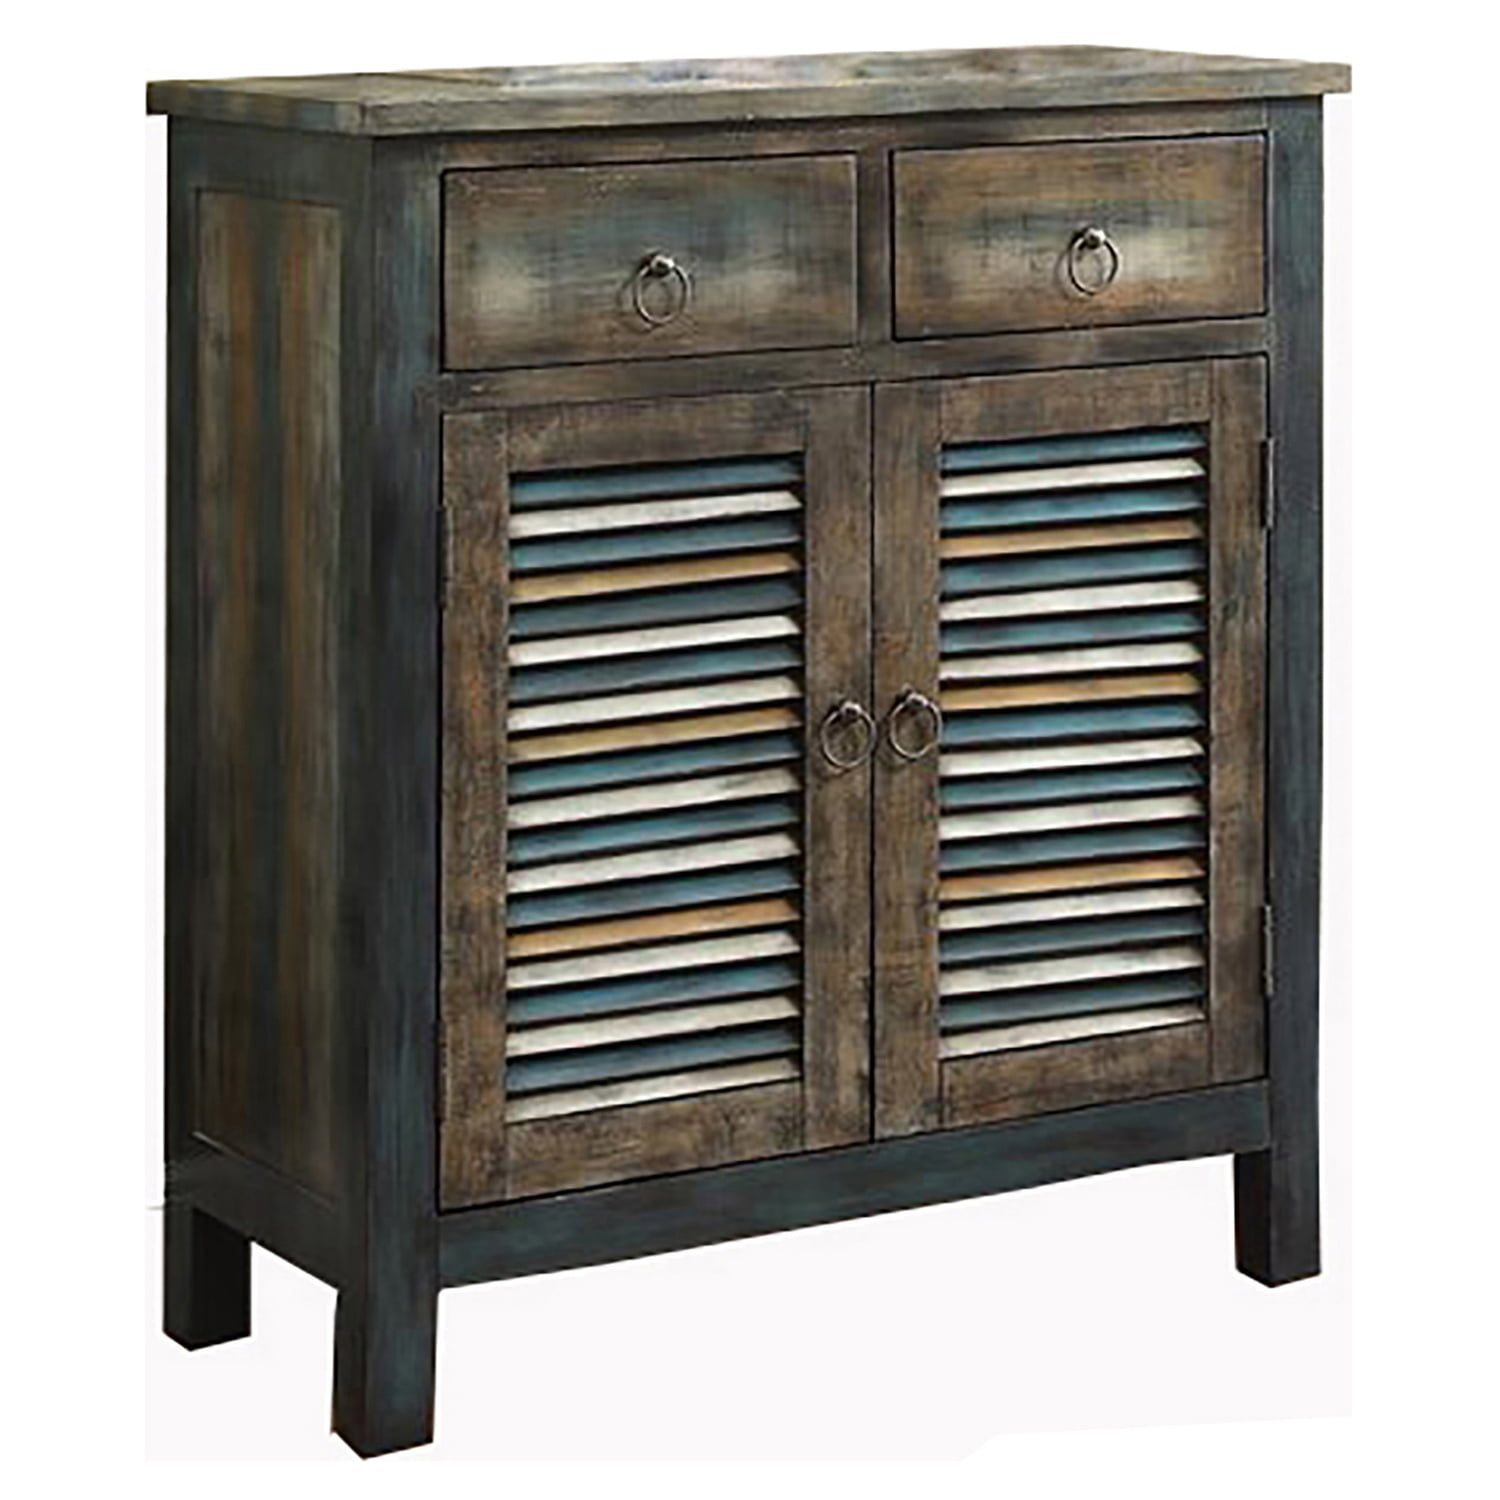 Picture of ACME 97253 Glancio Console Table - Antique Oak & Teal - 35 x 32 x 15 in.